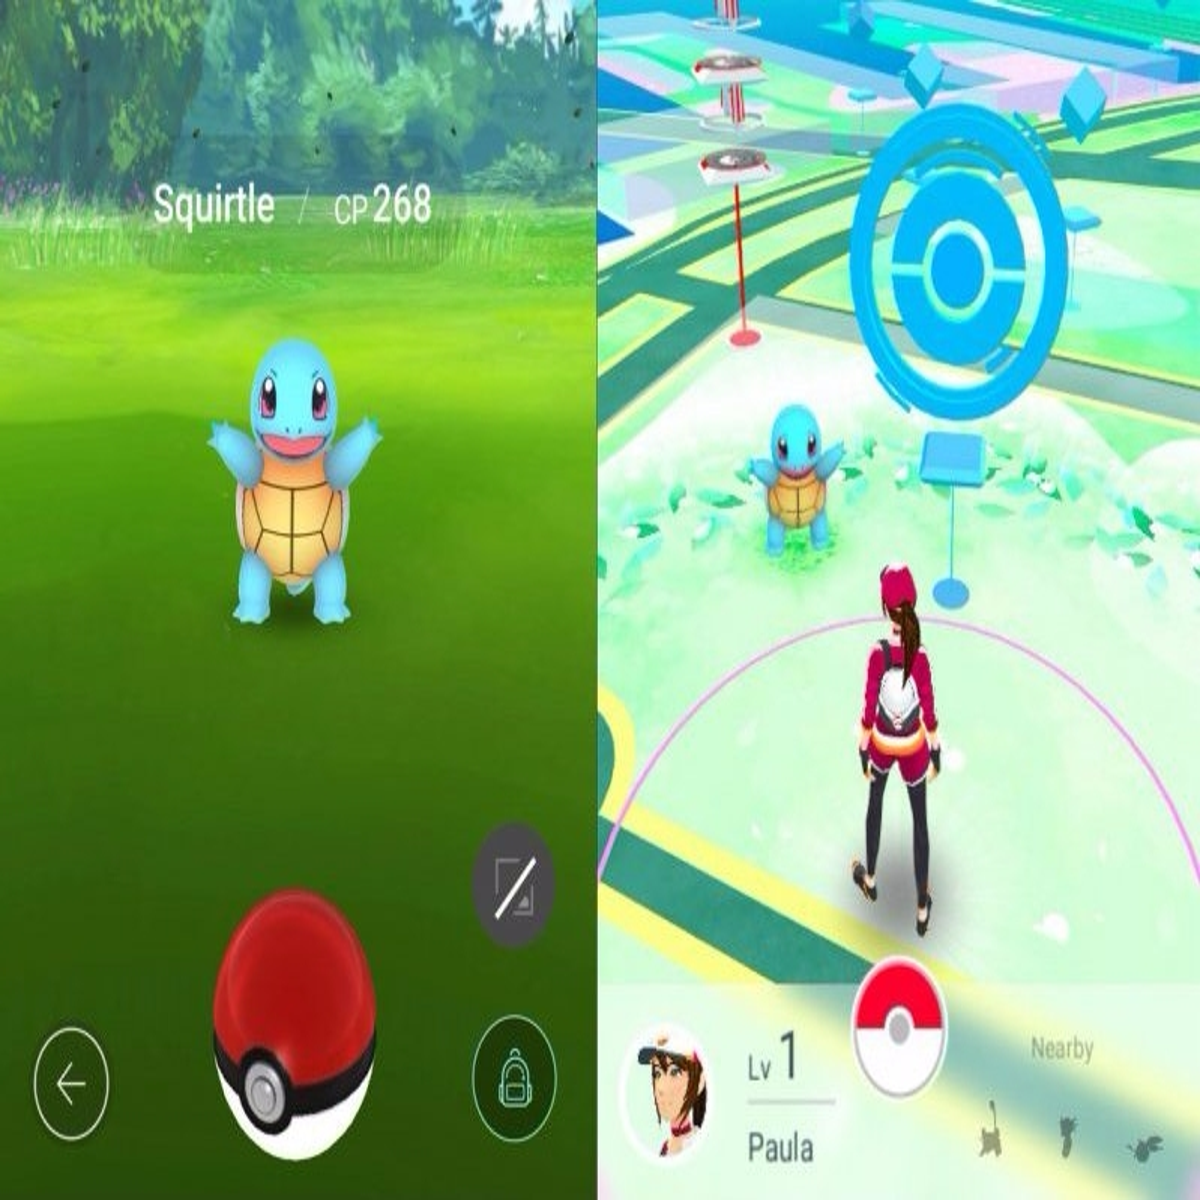 Pokémon Go' is now available in the UK